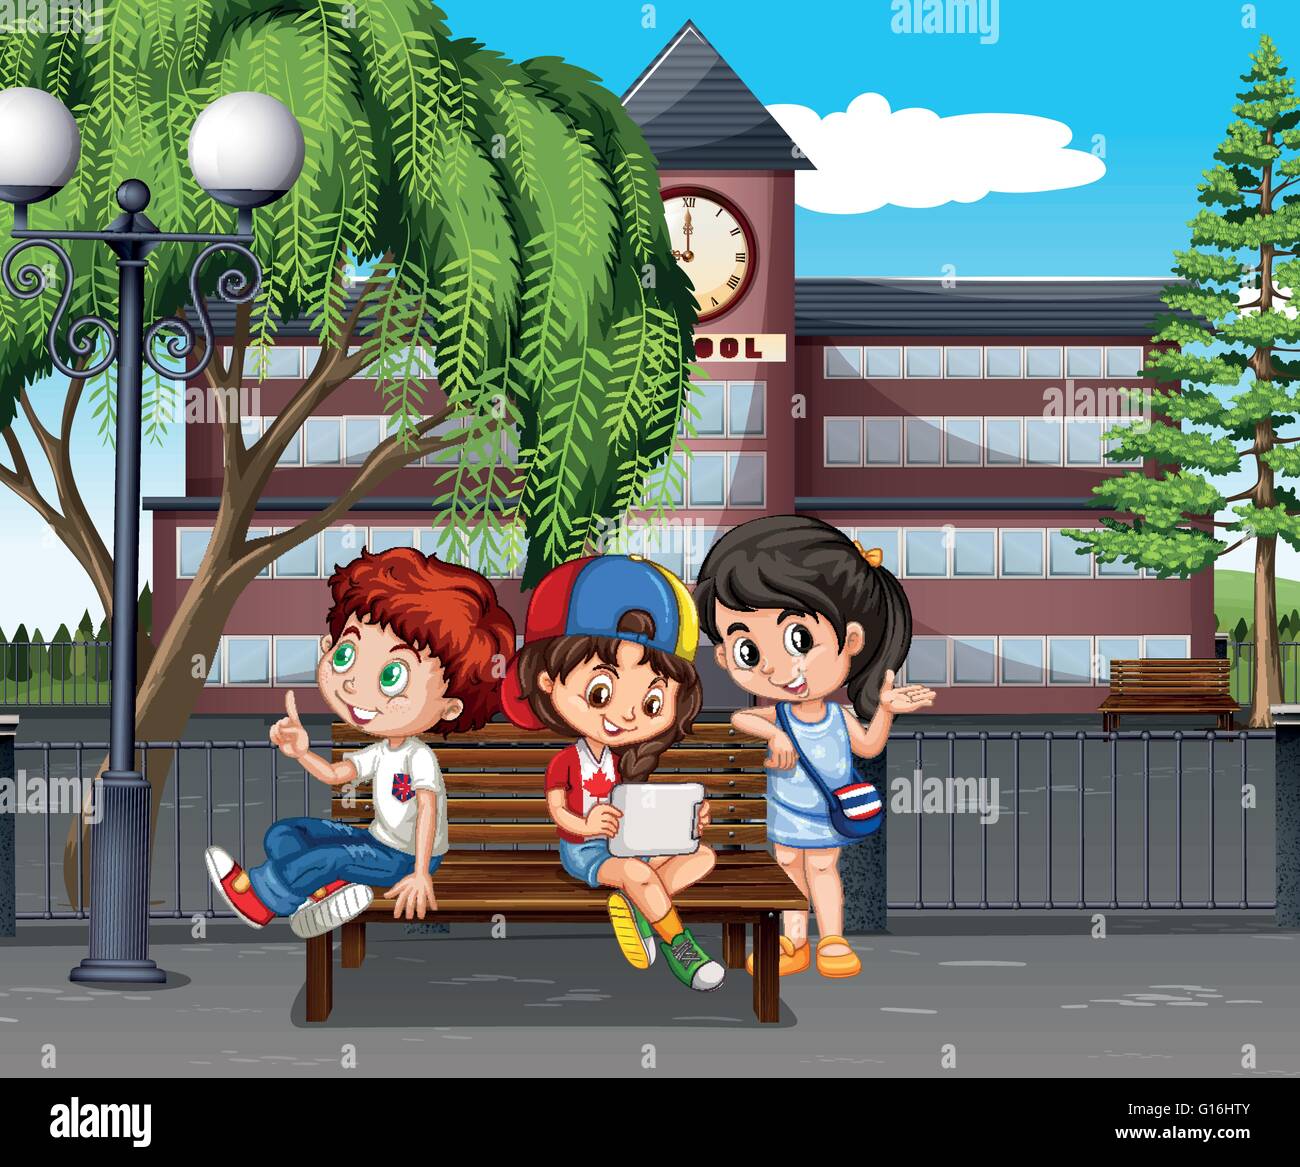 Children hanging out at the school illustration Stock Vector